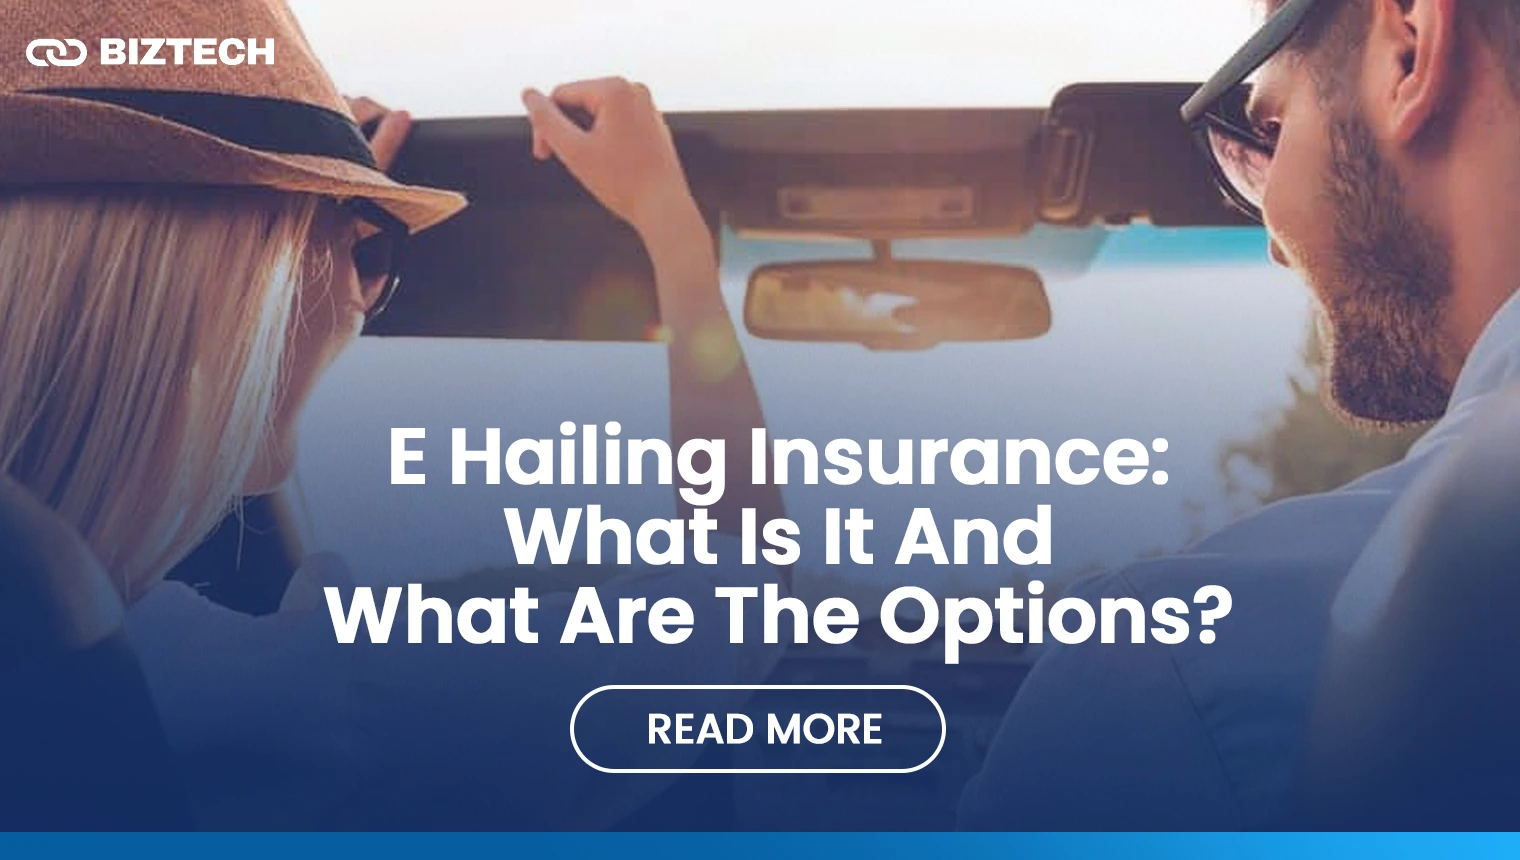 E Hailing Insurance: What Is It And What Are The Options?